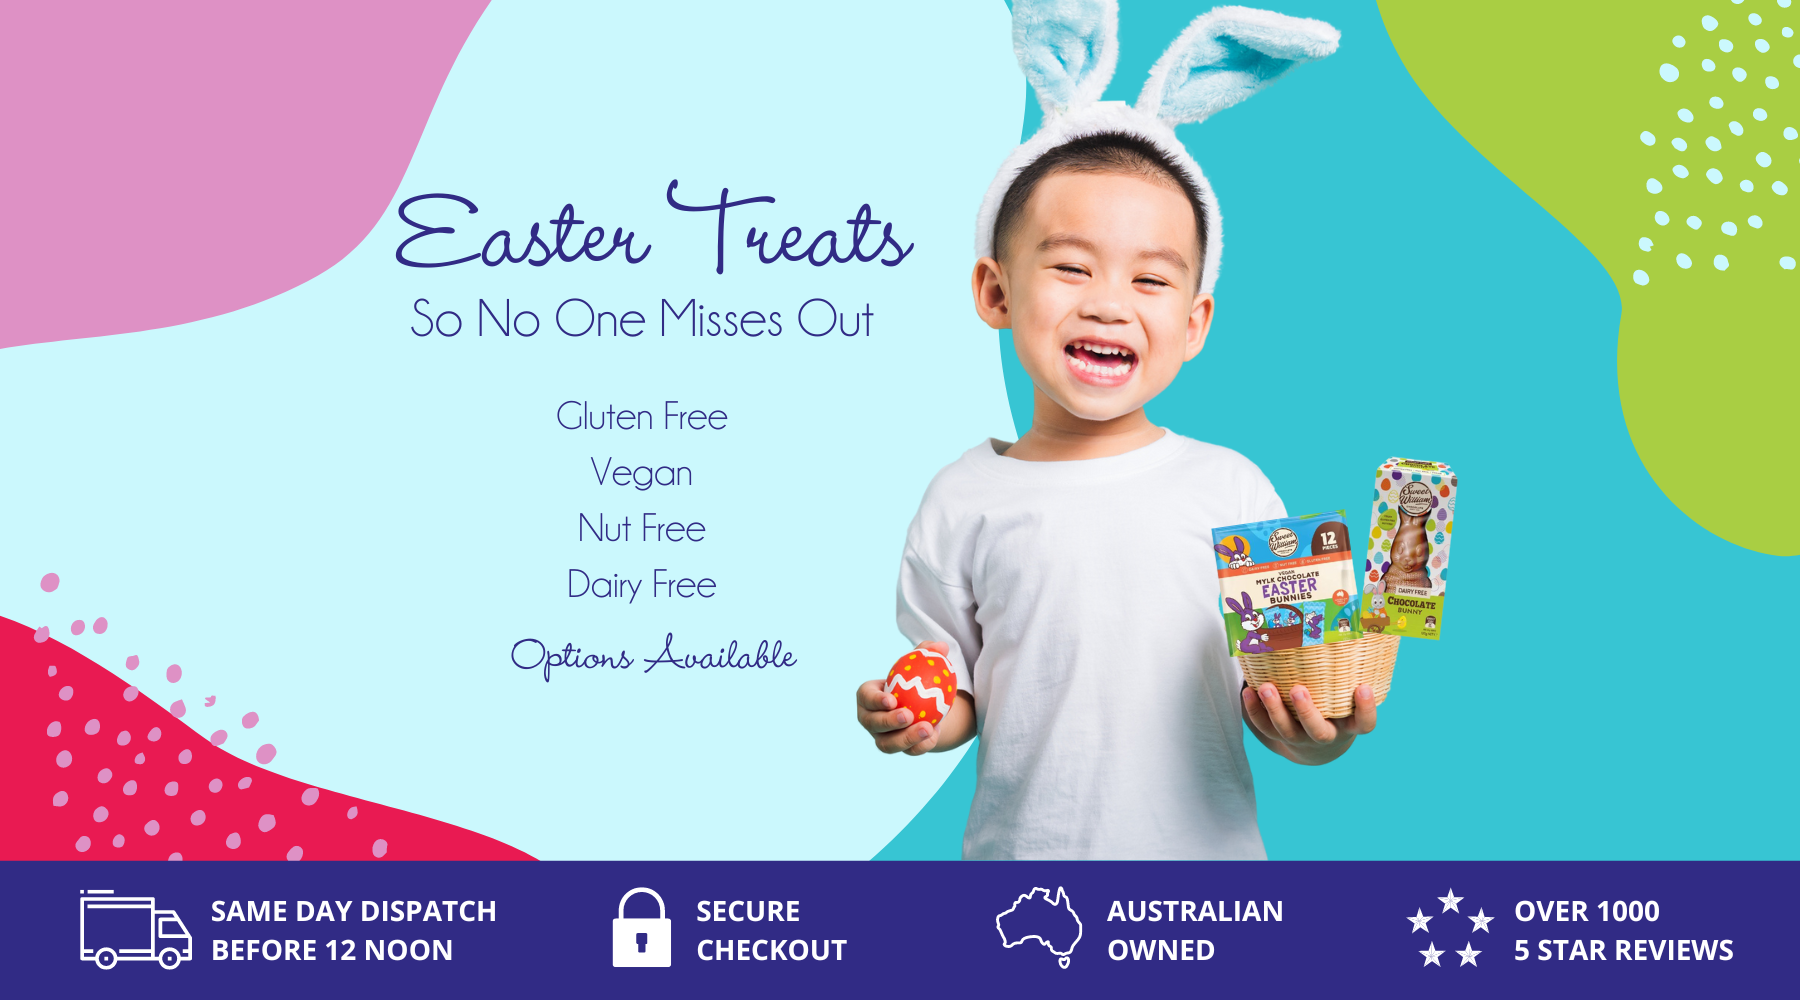 Allergy Friendly Easter Treats From Happy Tummies